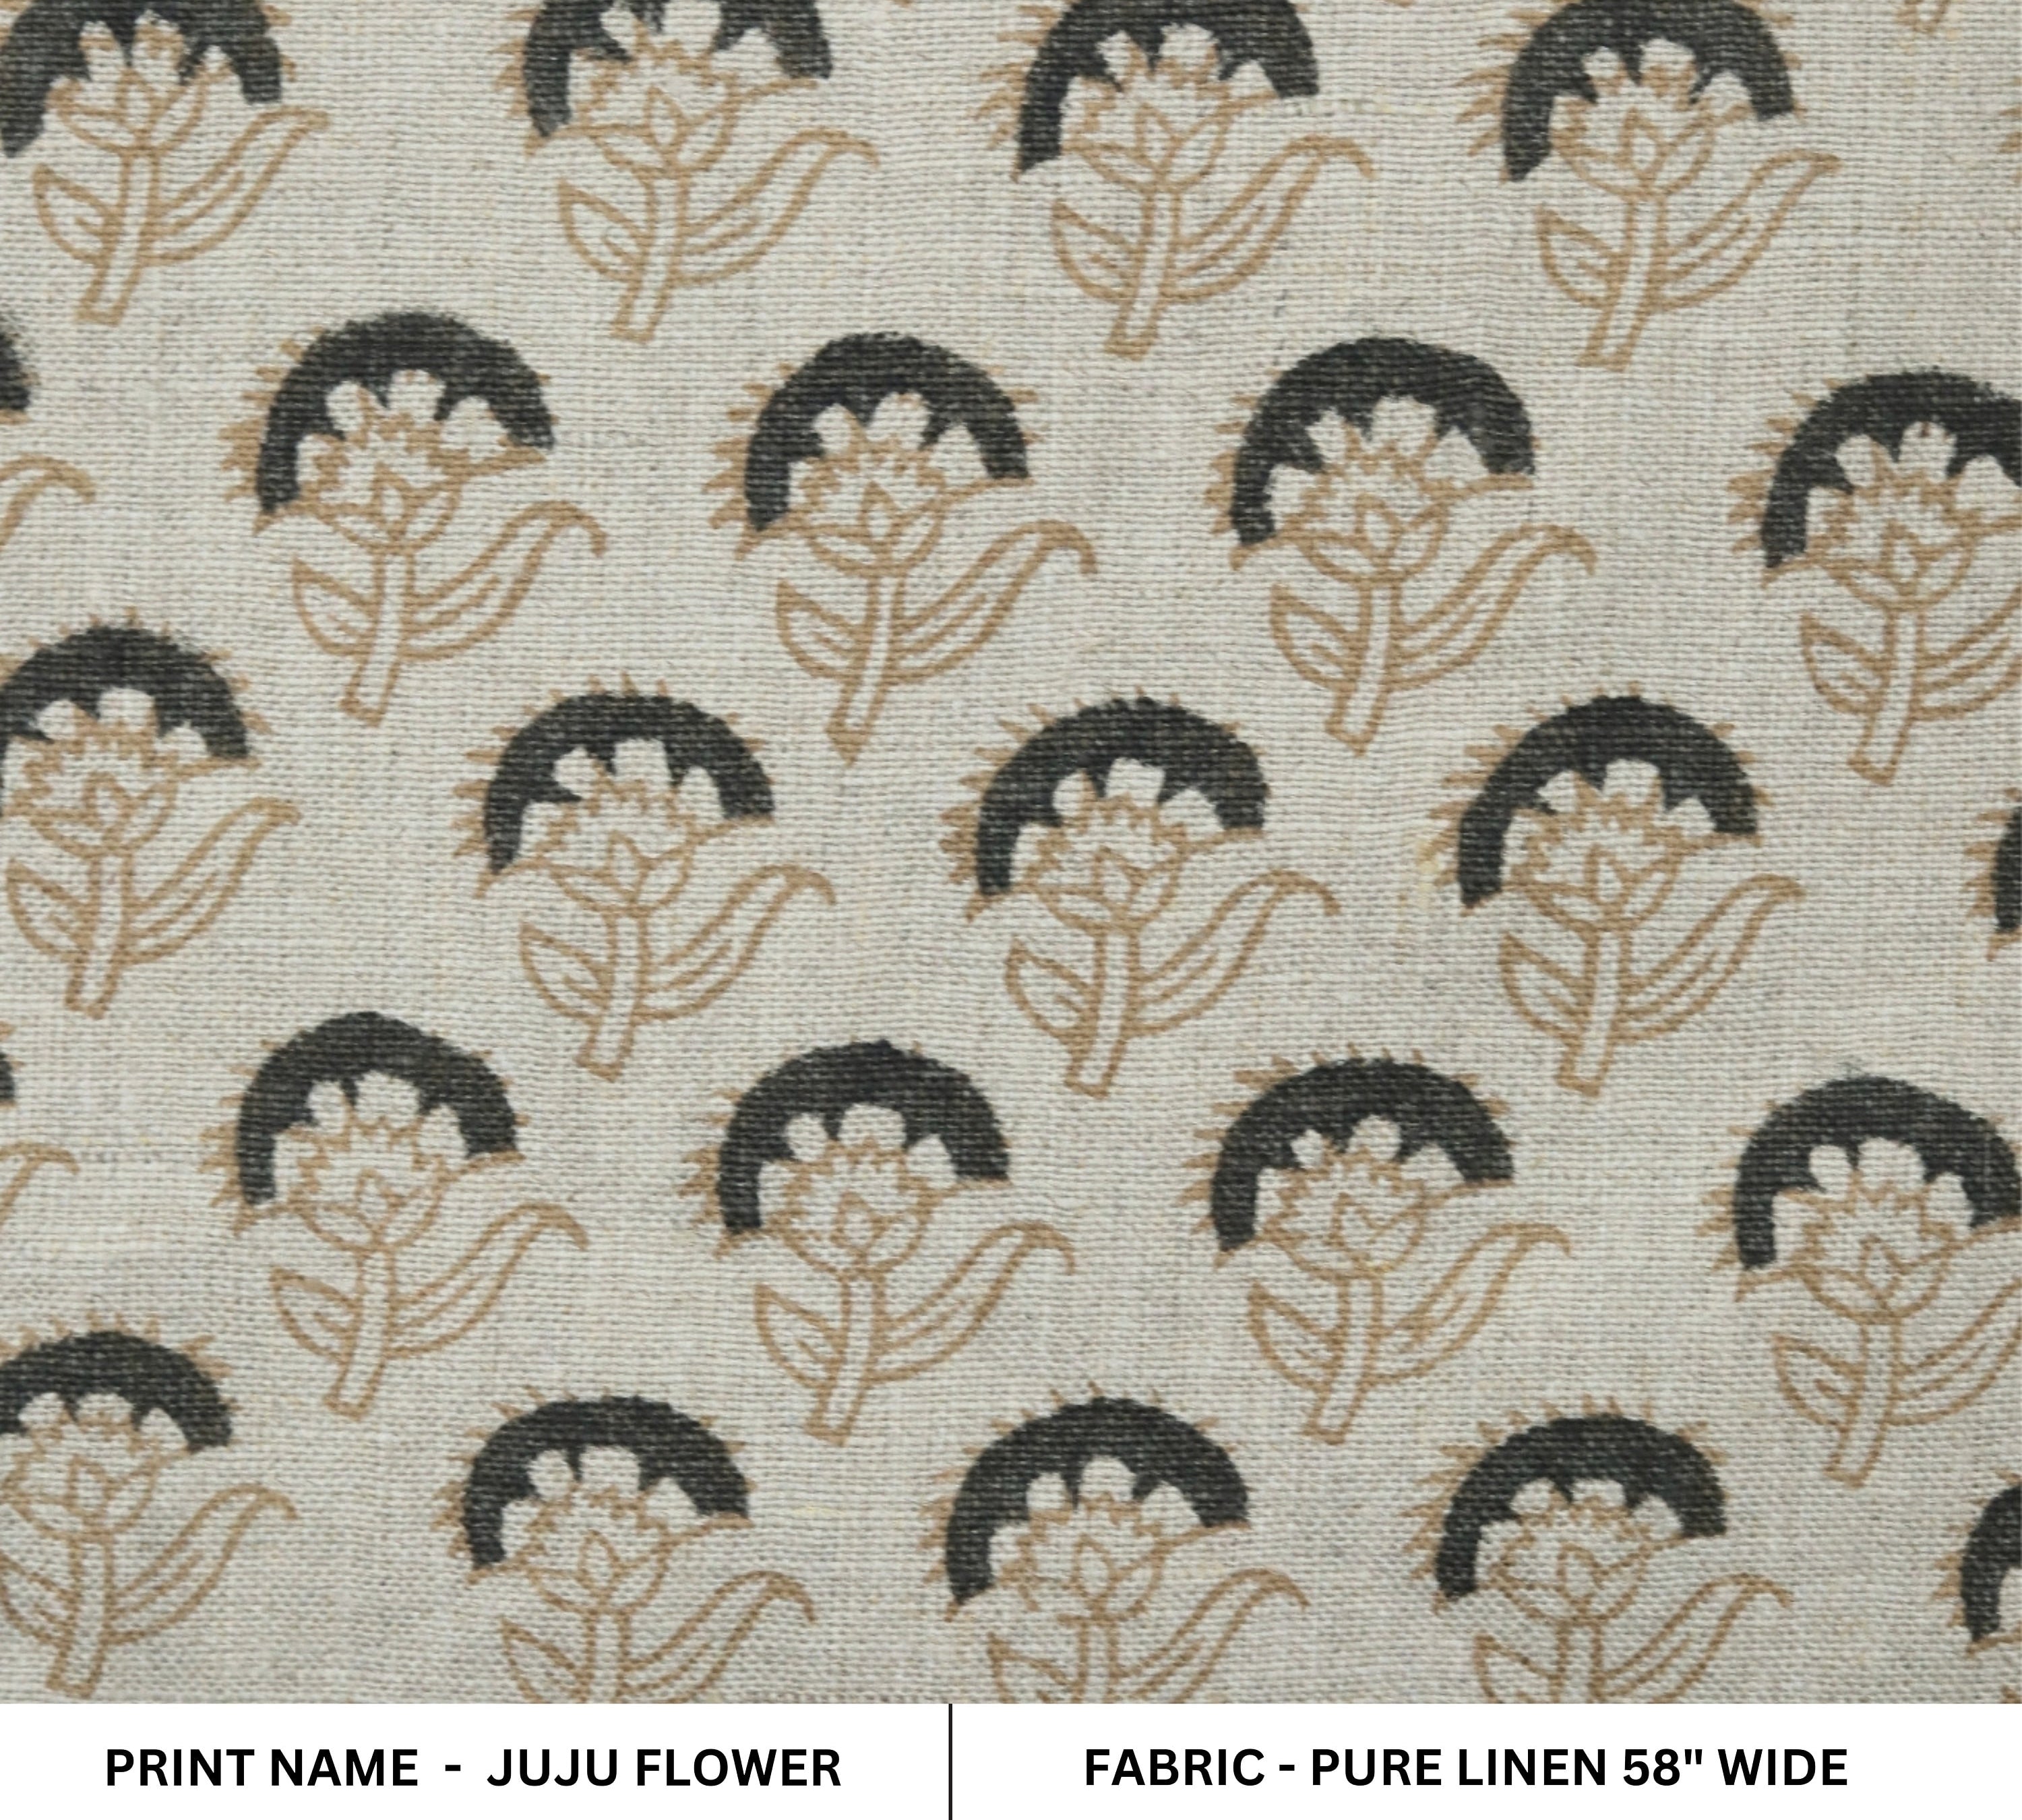 Fabric for dining chair cover, window curtains, cushions and table napkins, pure linen floral fabric  - JUJU FLOWER